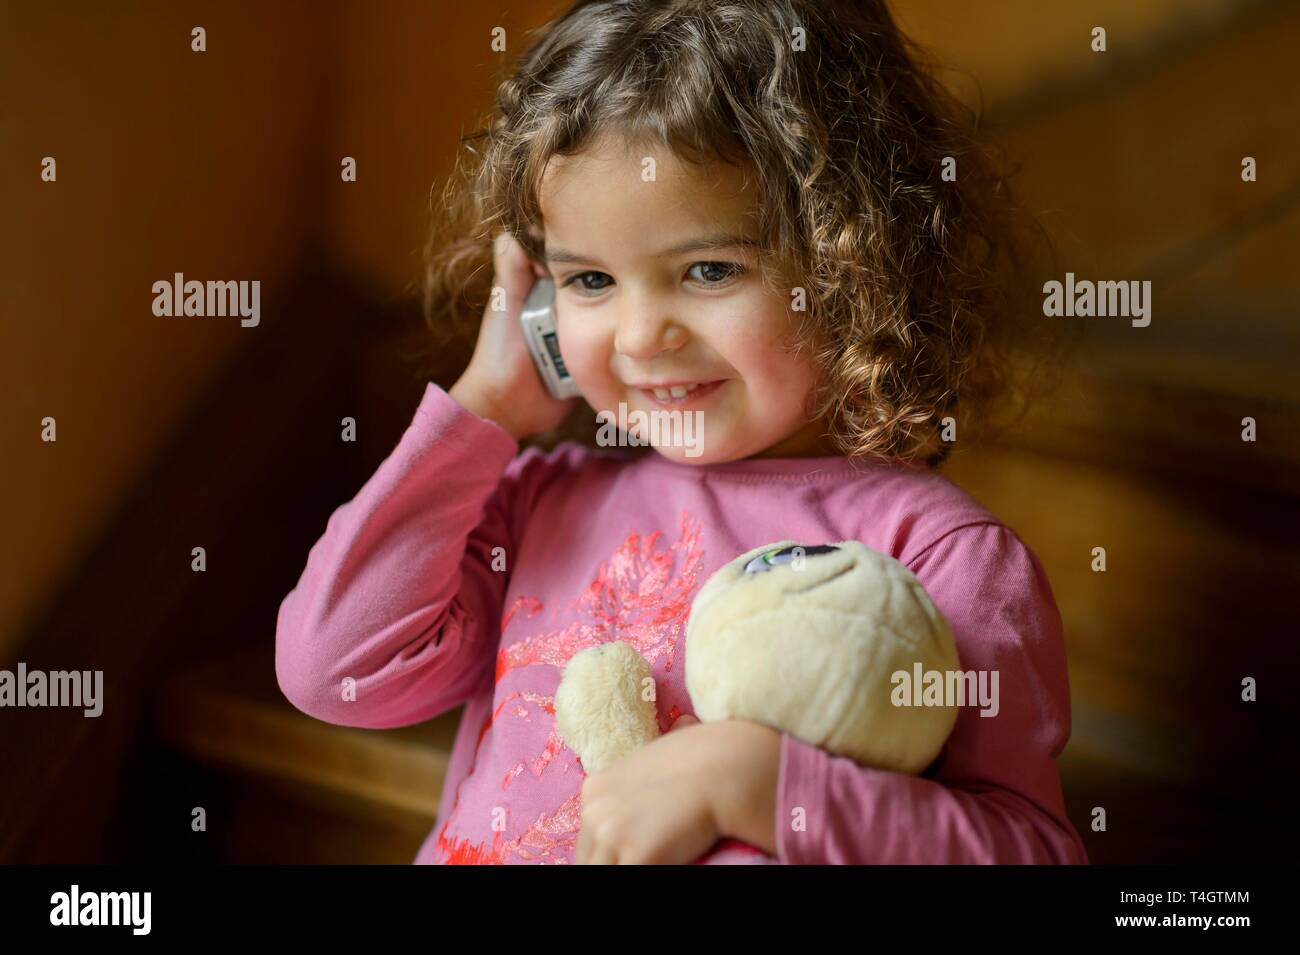 Girl, 3 years, portrait, sits smiling on the stairs with mobile phone, phoned, Germany Stock Photo